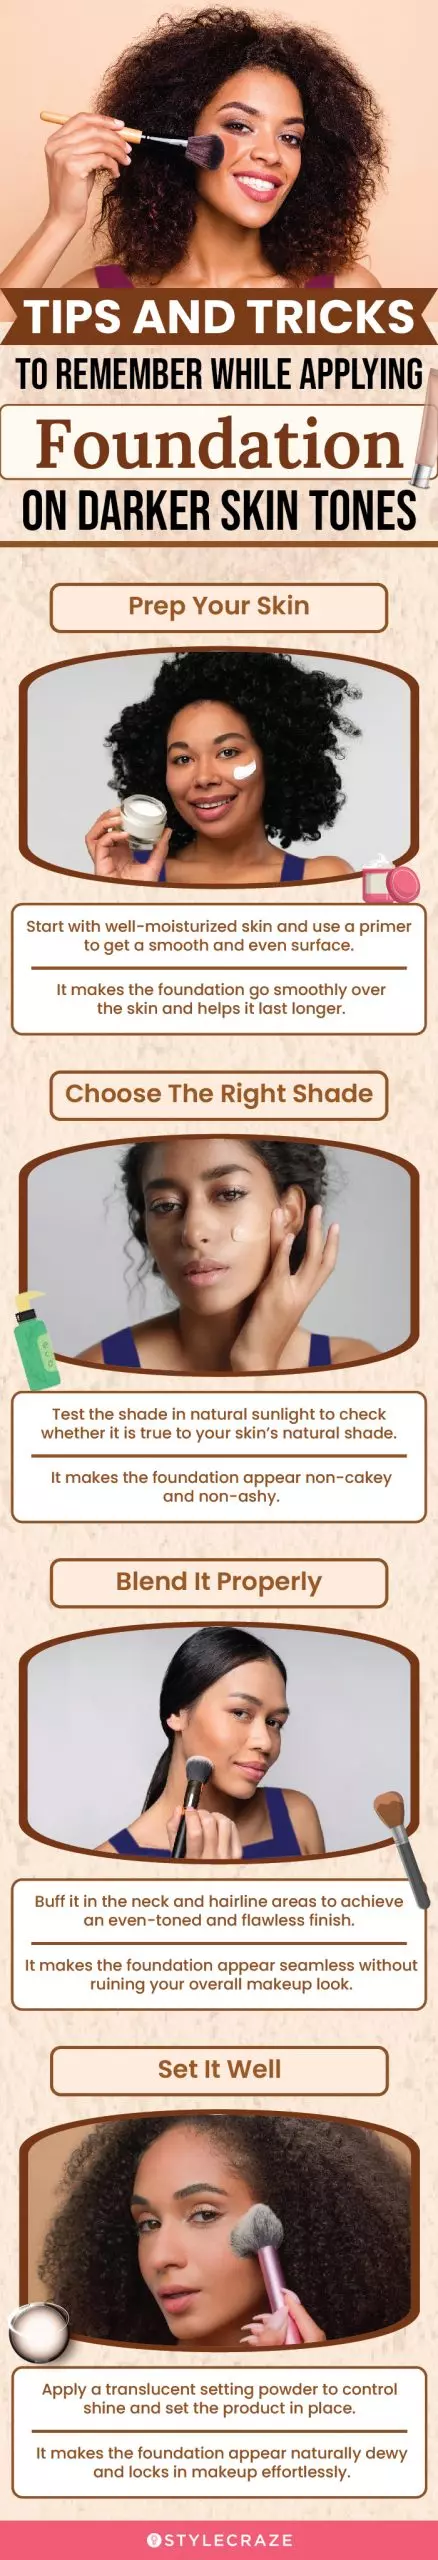 Tips And Tricks To Remember While Applying Foundation On Darker Skin Tones (infographic)